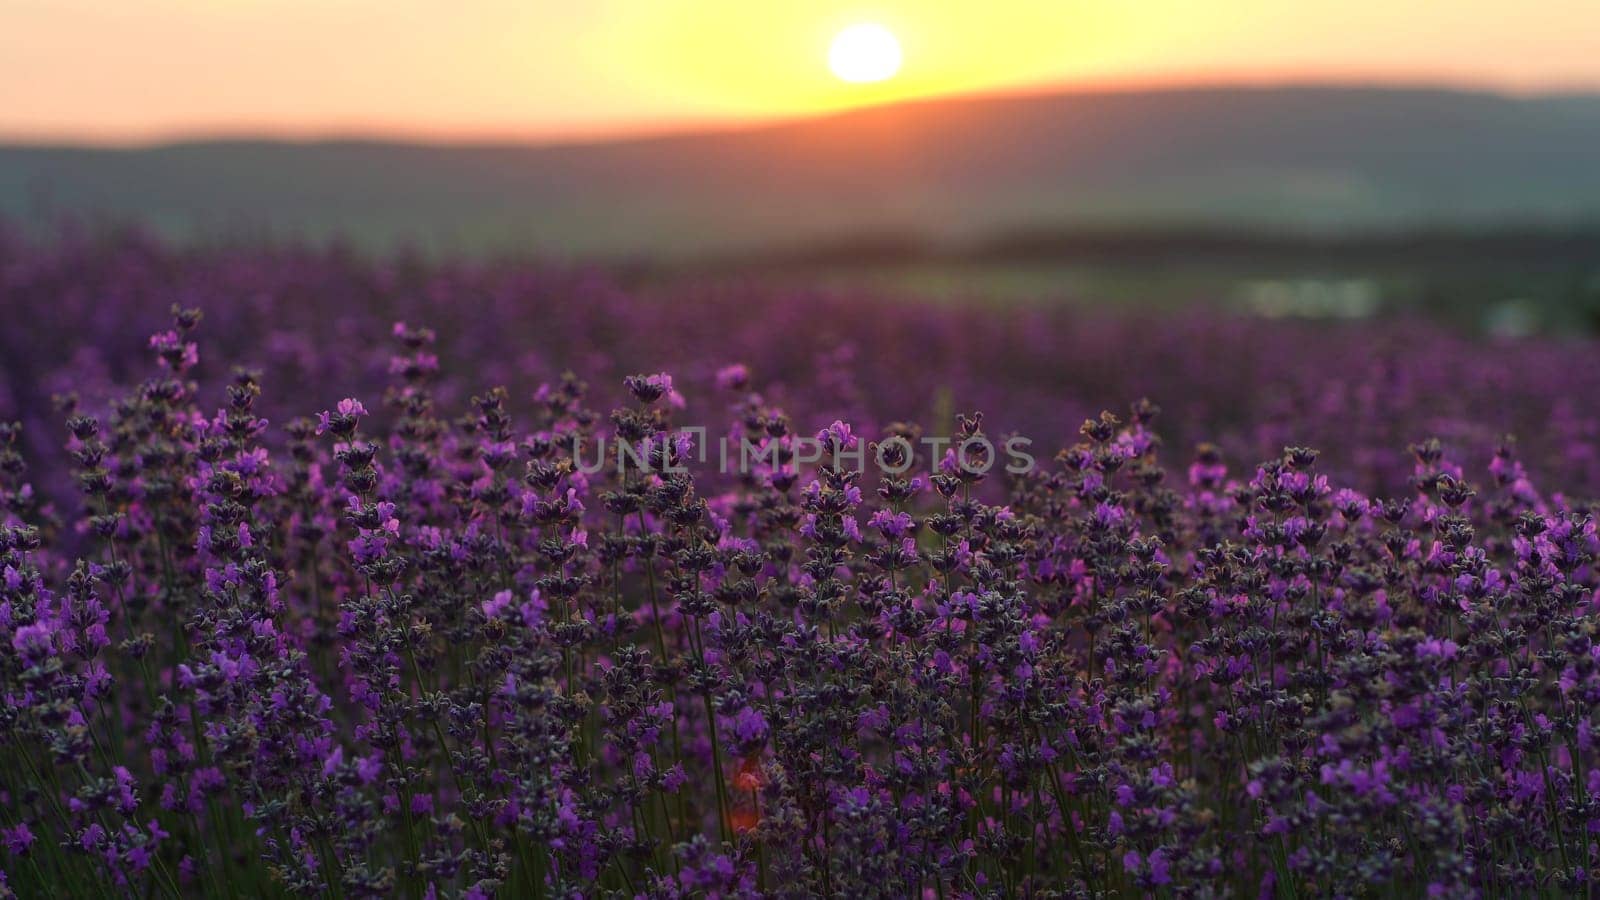 Lavender field at sunset. Blooming purple fragrant lavender flowers against the backdrop of a sunset sky by Matiunina